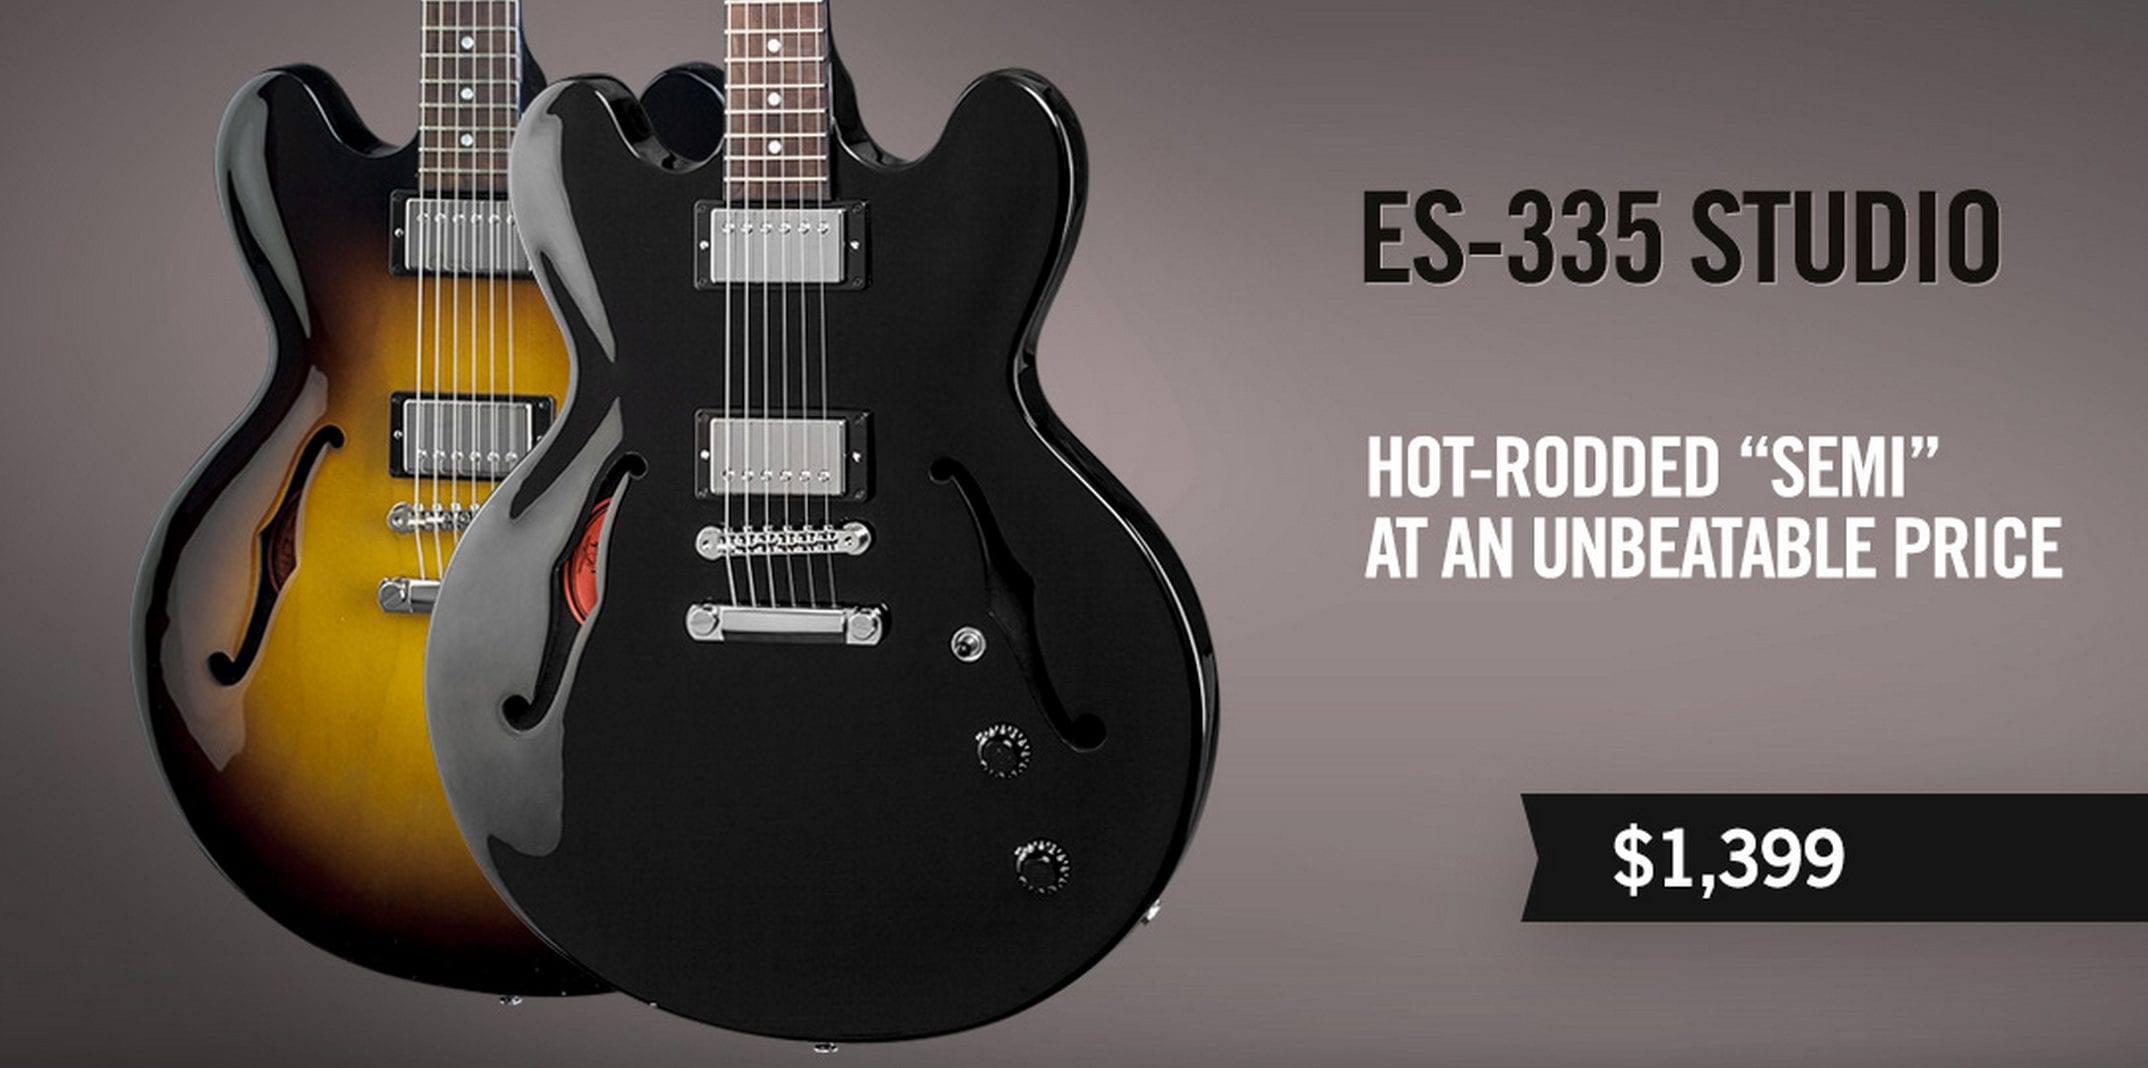 Gibson releases new ES-335 Studio and ES-339 Studio - All Things Gear